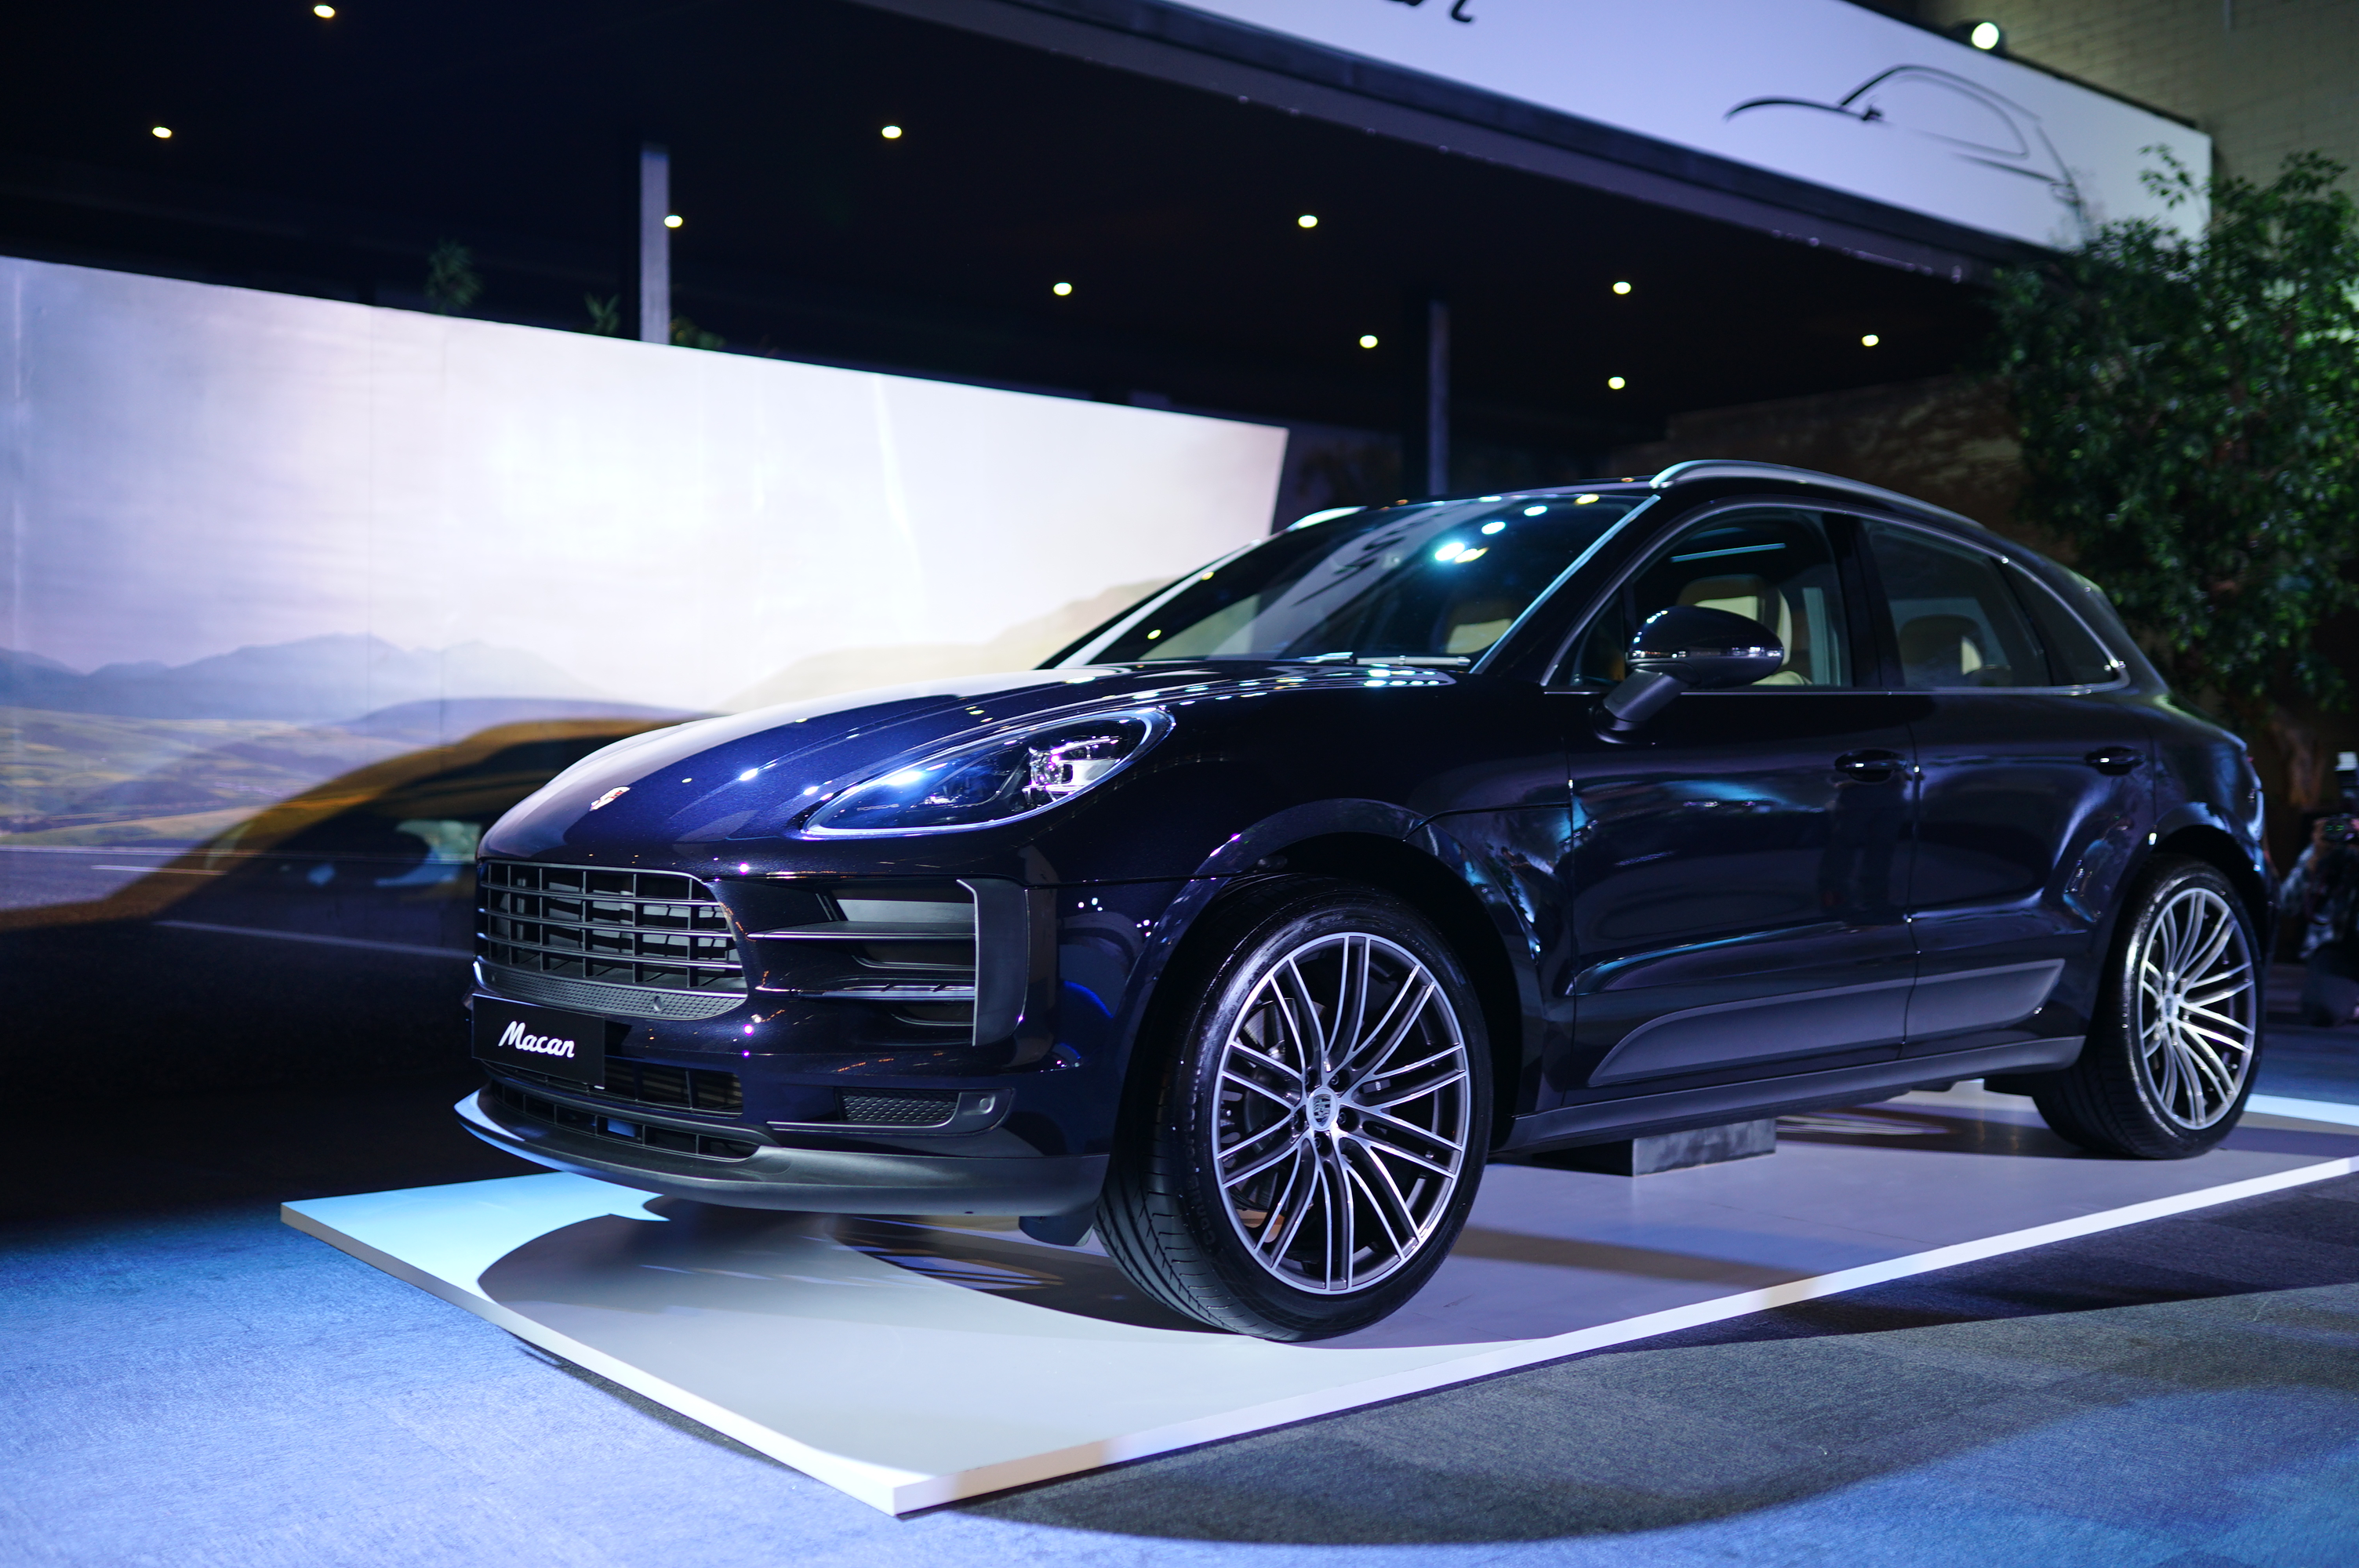 The new Porsche Macan on display at the launch event